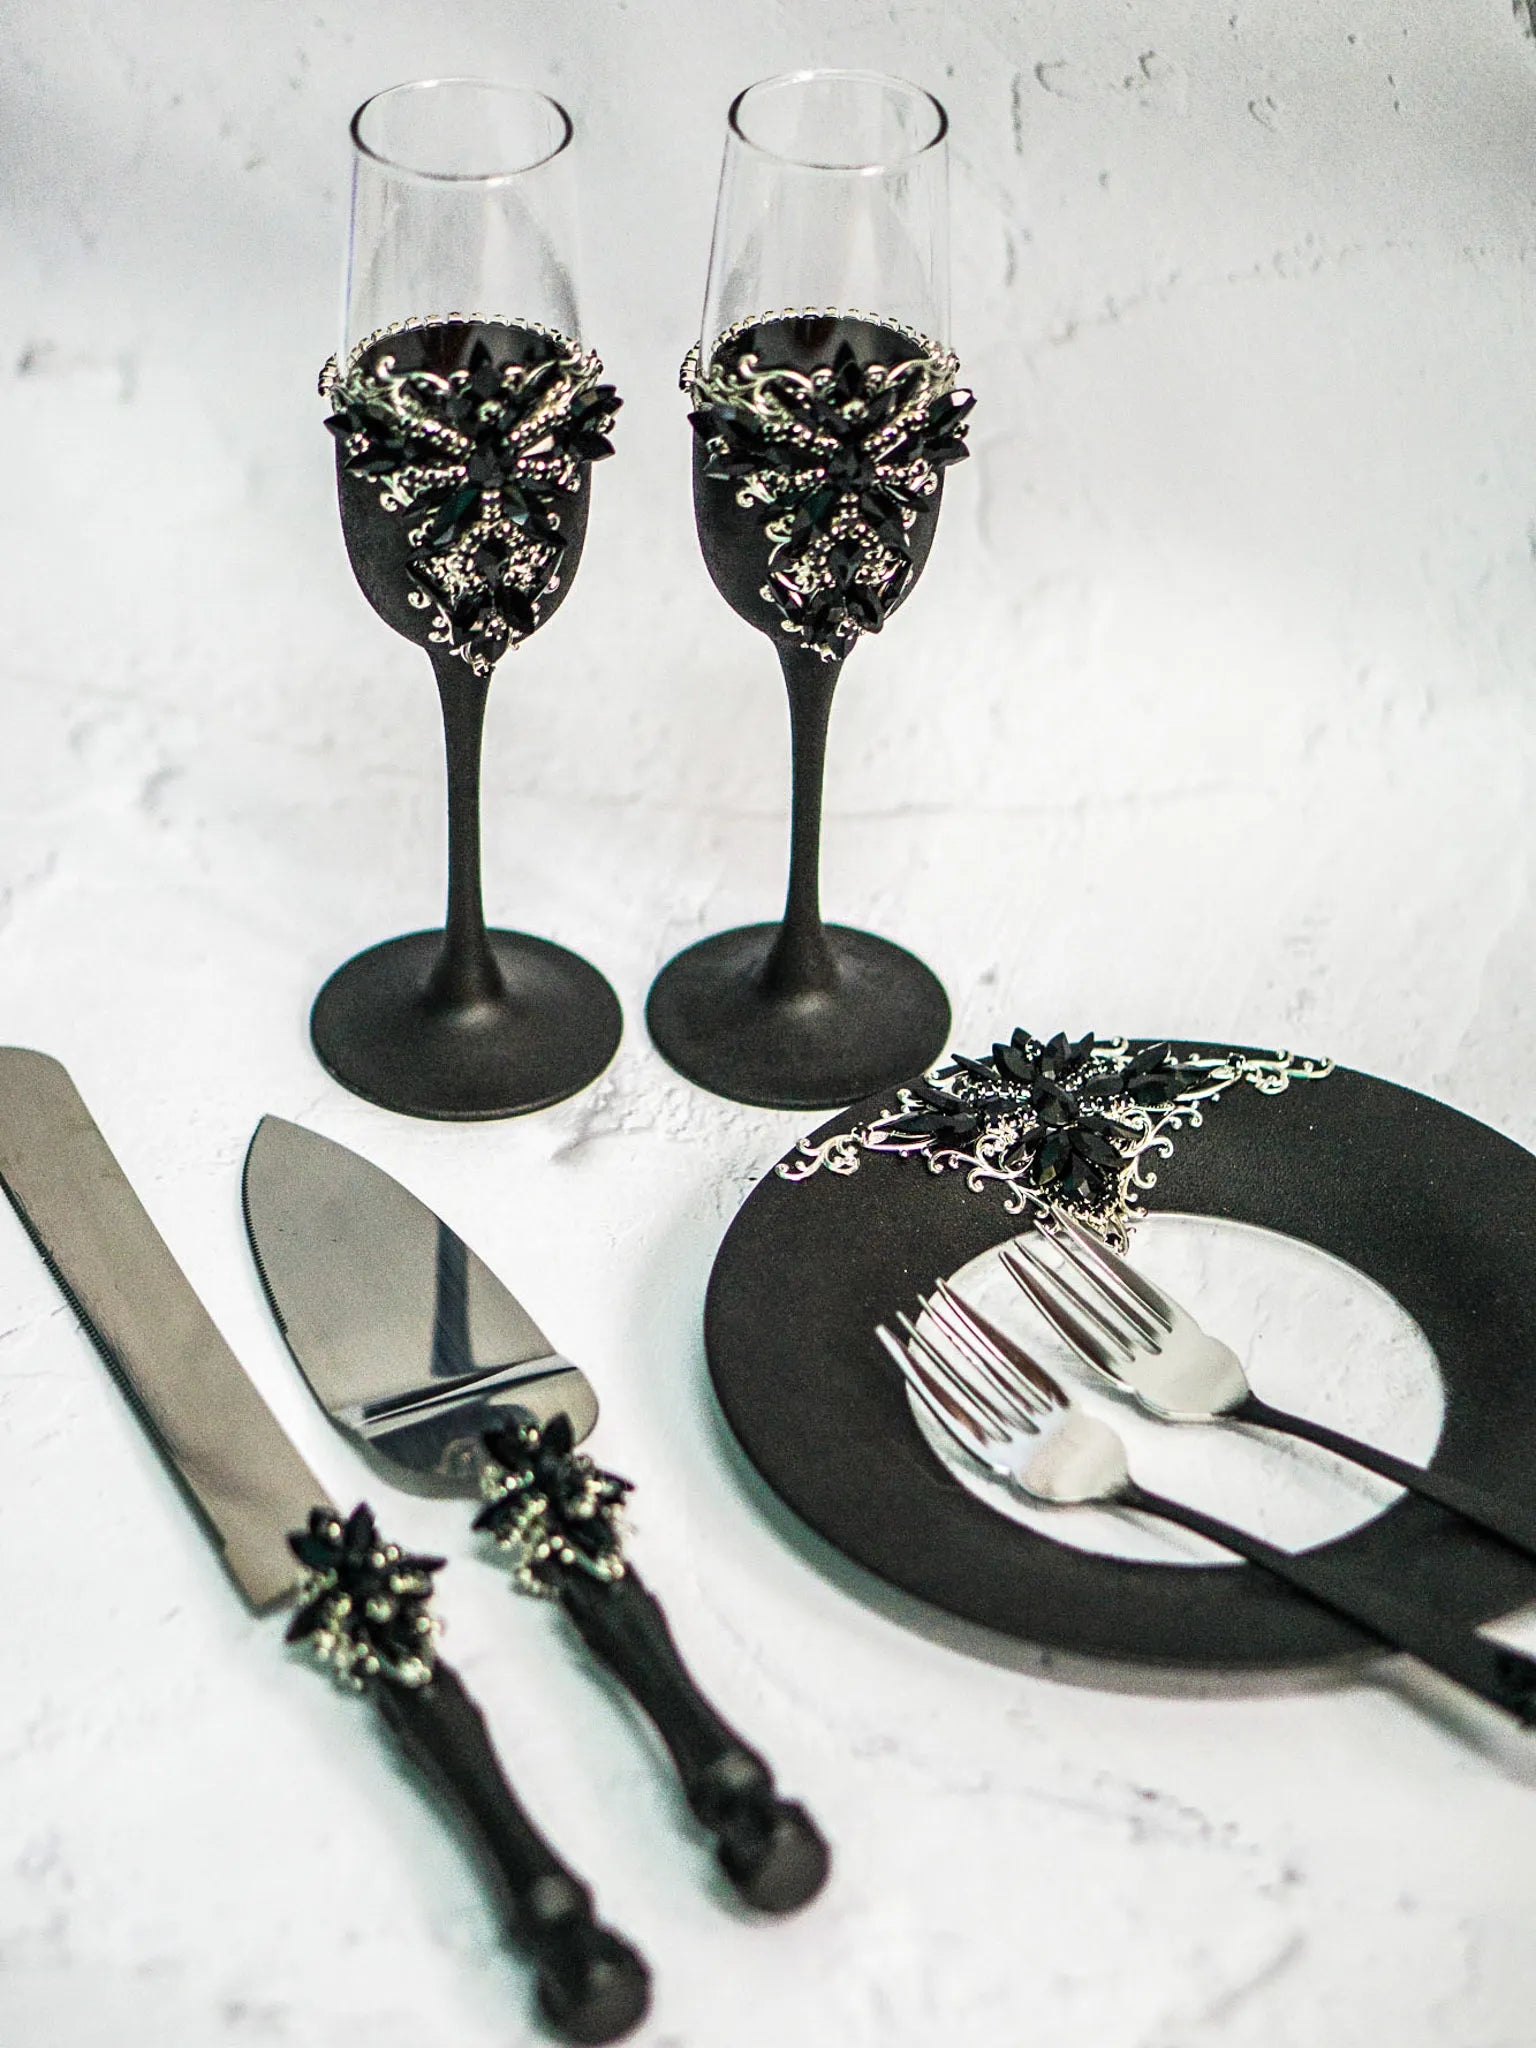 Elegant Gothic Cake Plate and Fork Set with Silver Filigree